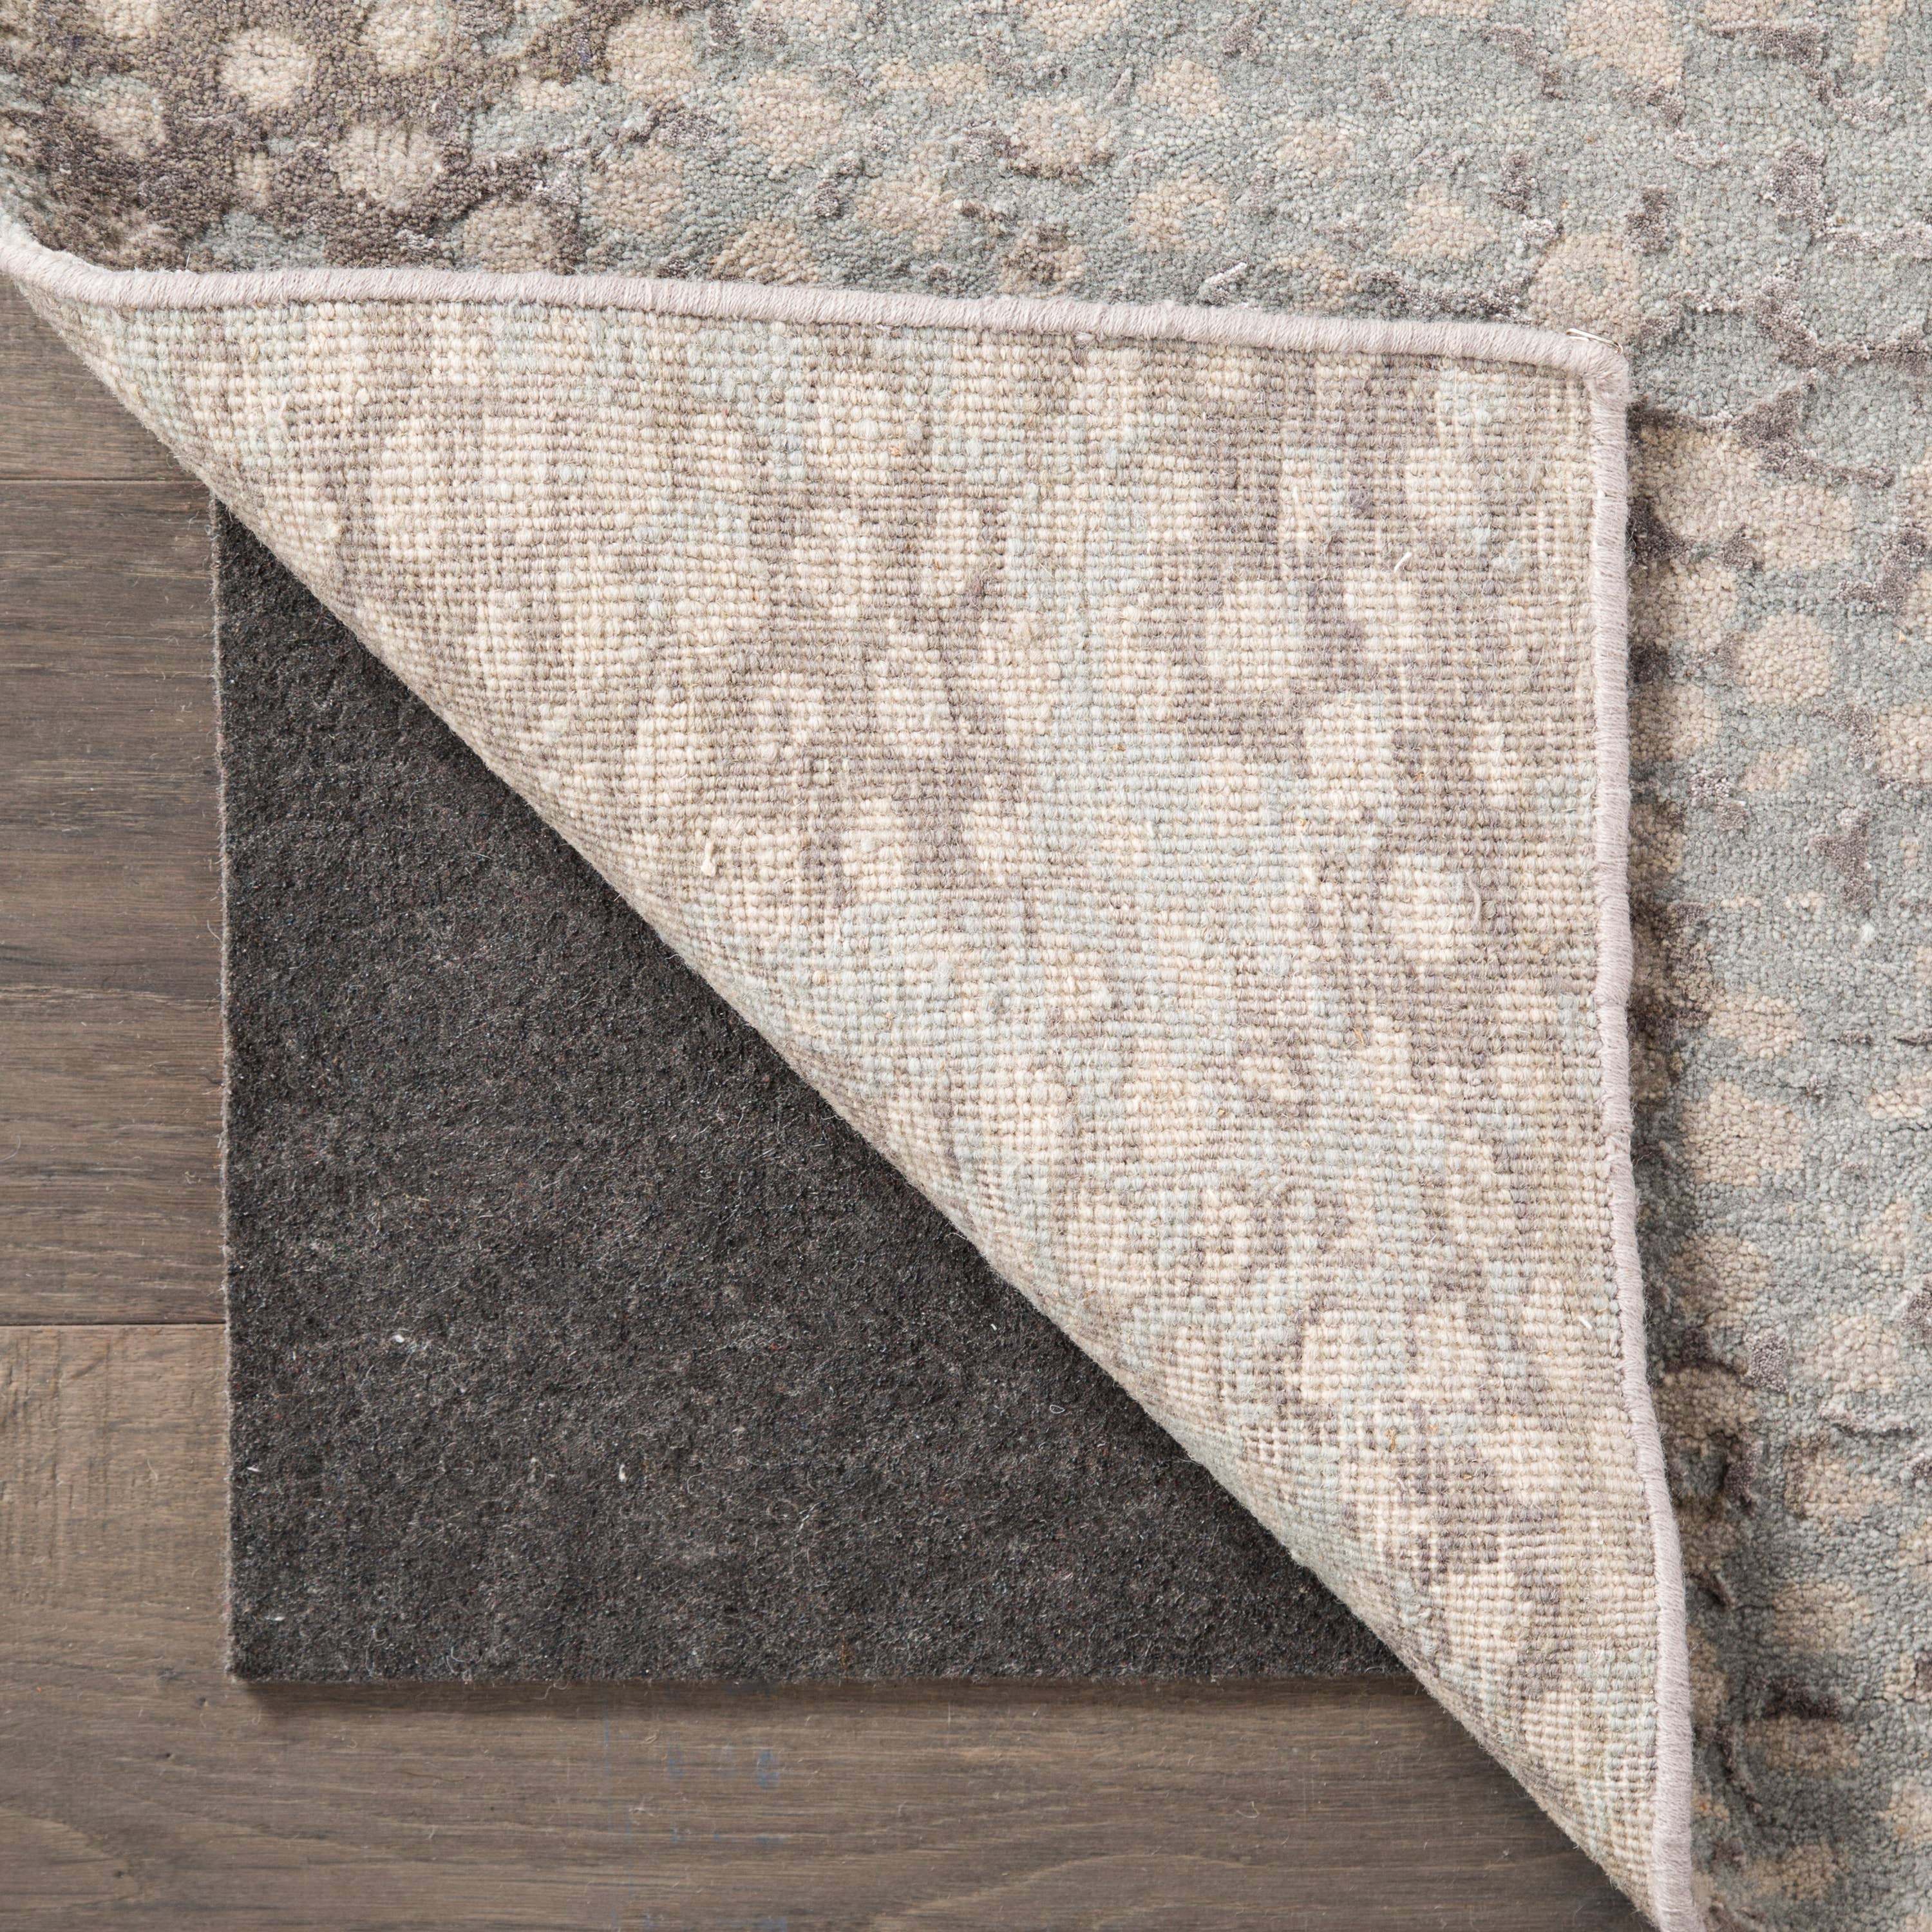 Perfect for any rug in the home, the Jaipur Living Premium Hold rug pad provides cushioning and insulation. With its needle-punched recycled fibers and textured rubber-backing, this floor covering ensures non-slip and durable protection that works for both hard surfaces and carpeted areas.   RP01  Handwash